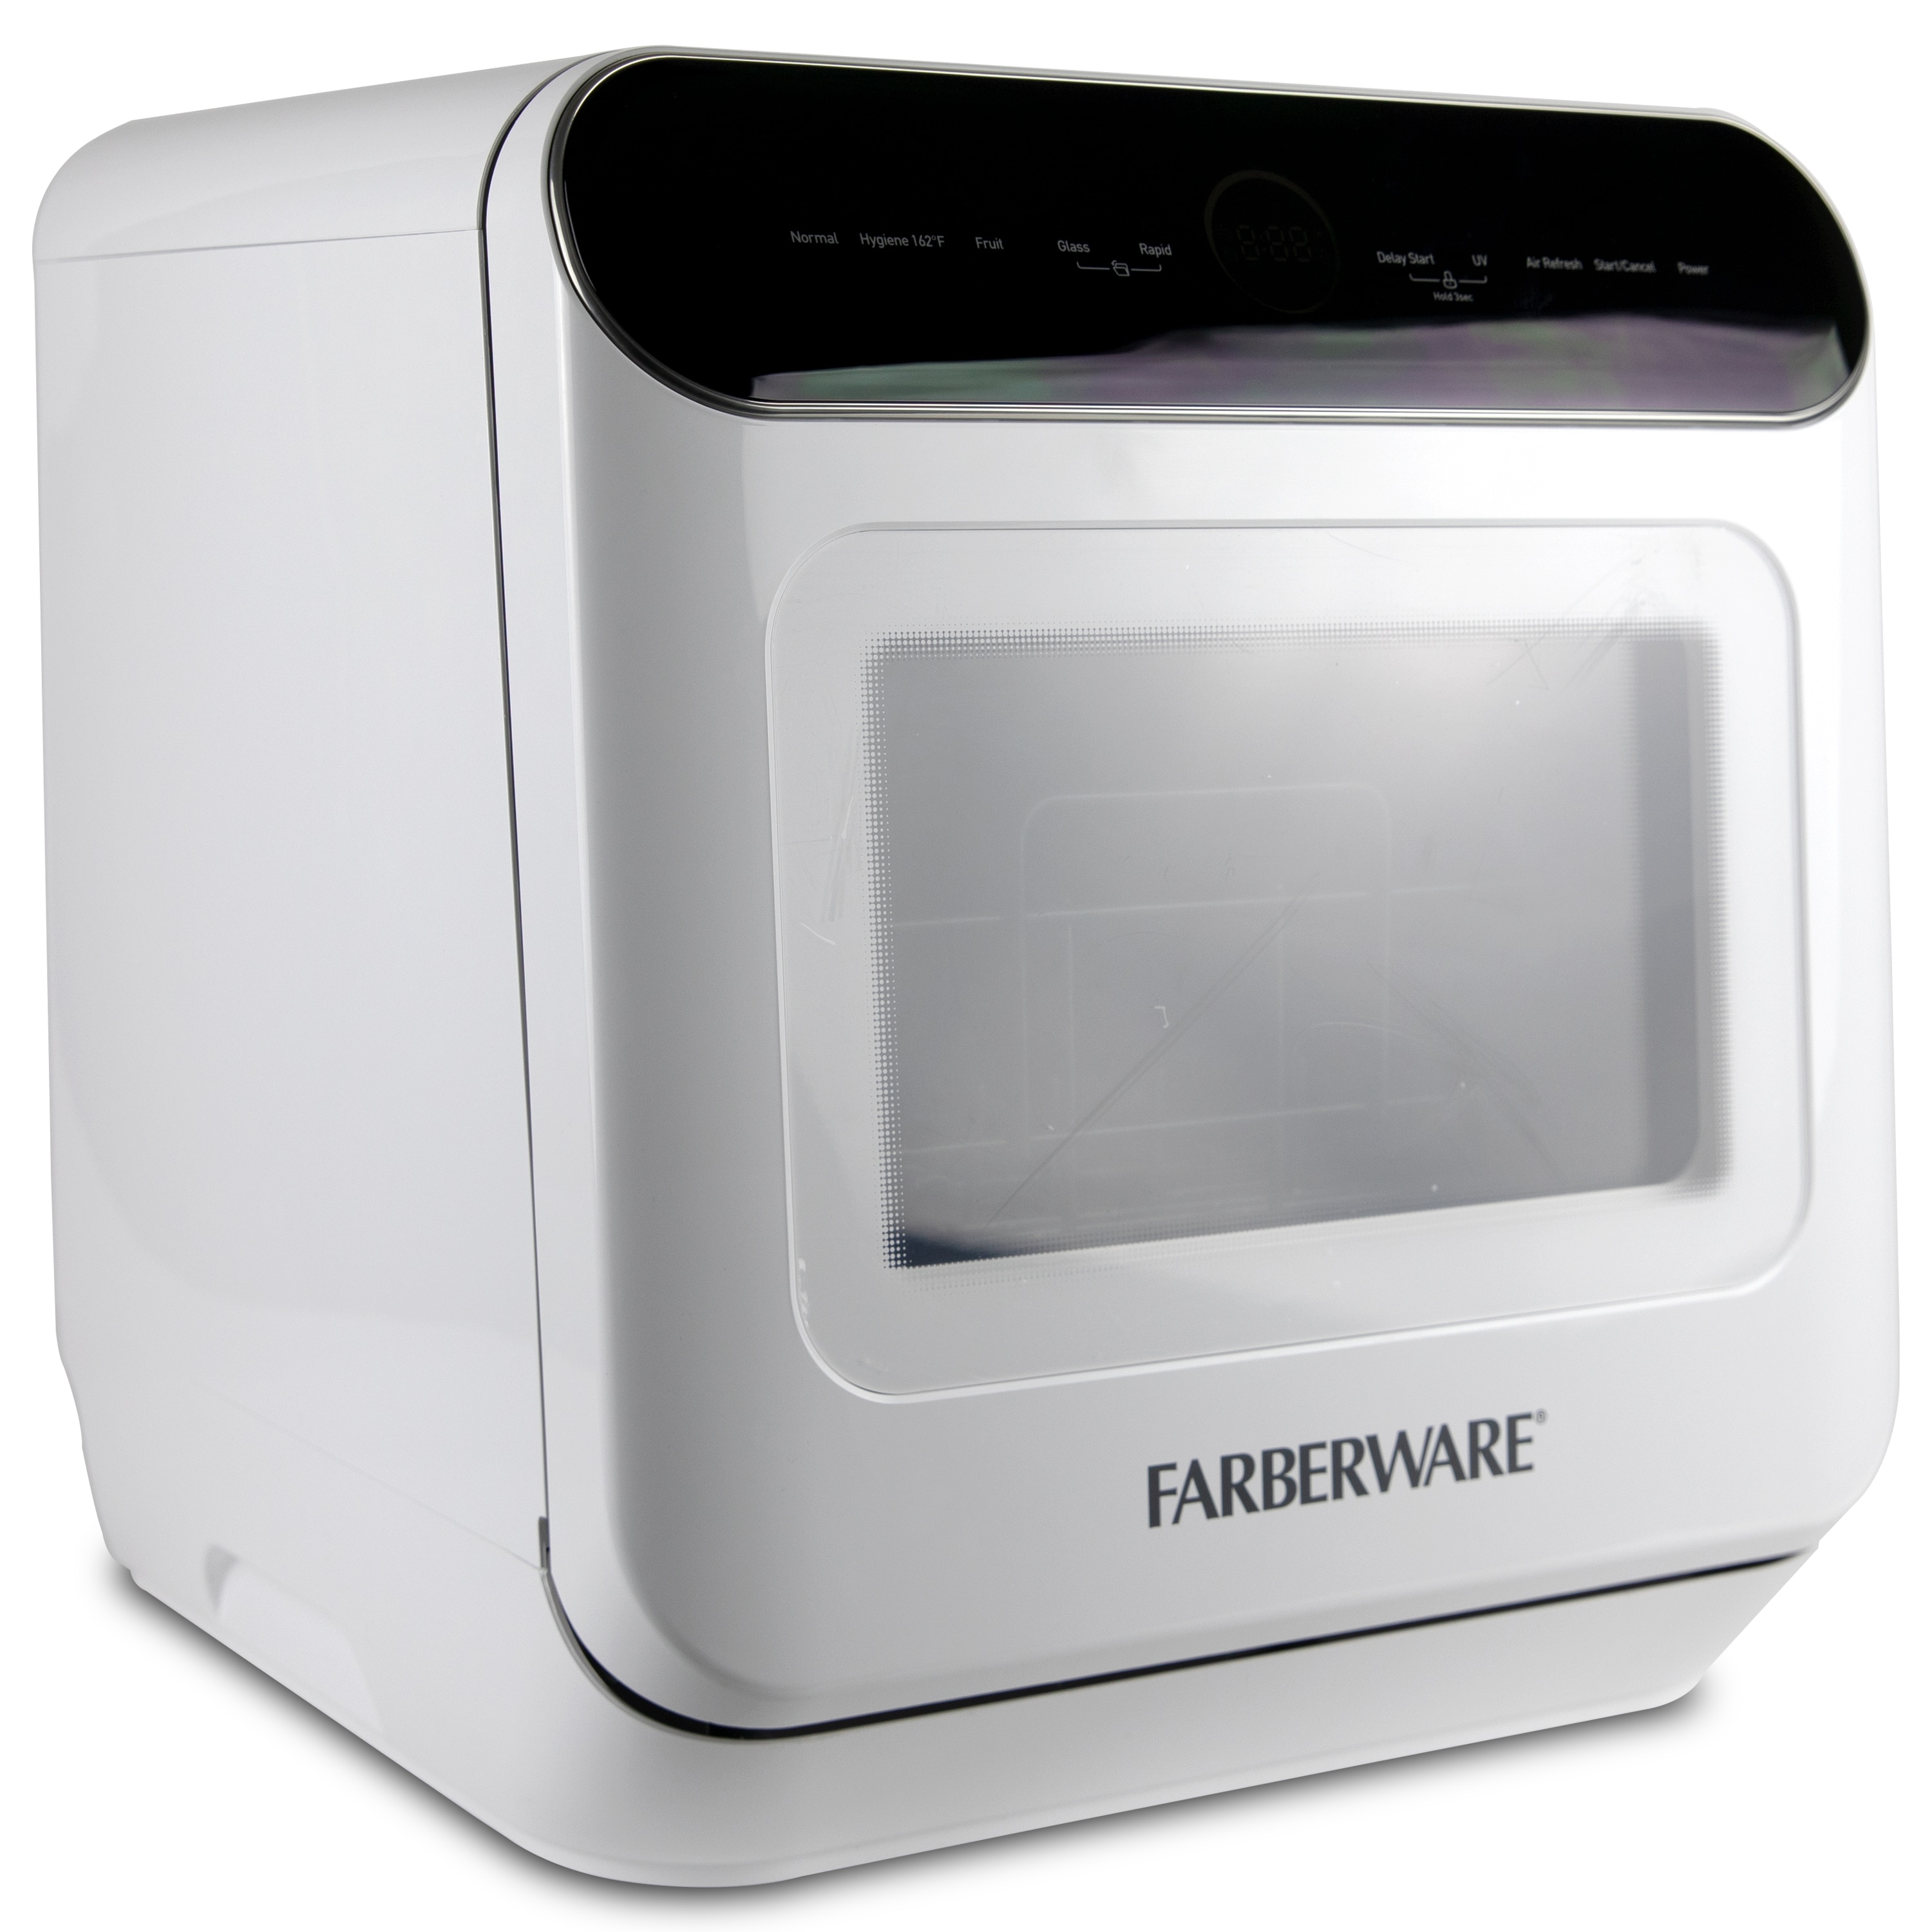 I'm trying out this tiny Farberware dishwasher that's about the size of a  large microwave. It's the only portable dishwasher to my knowledge that has  a built in water tank; no faucet